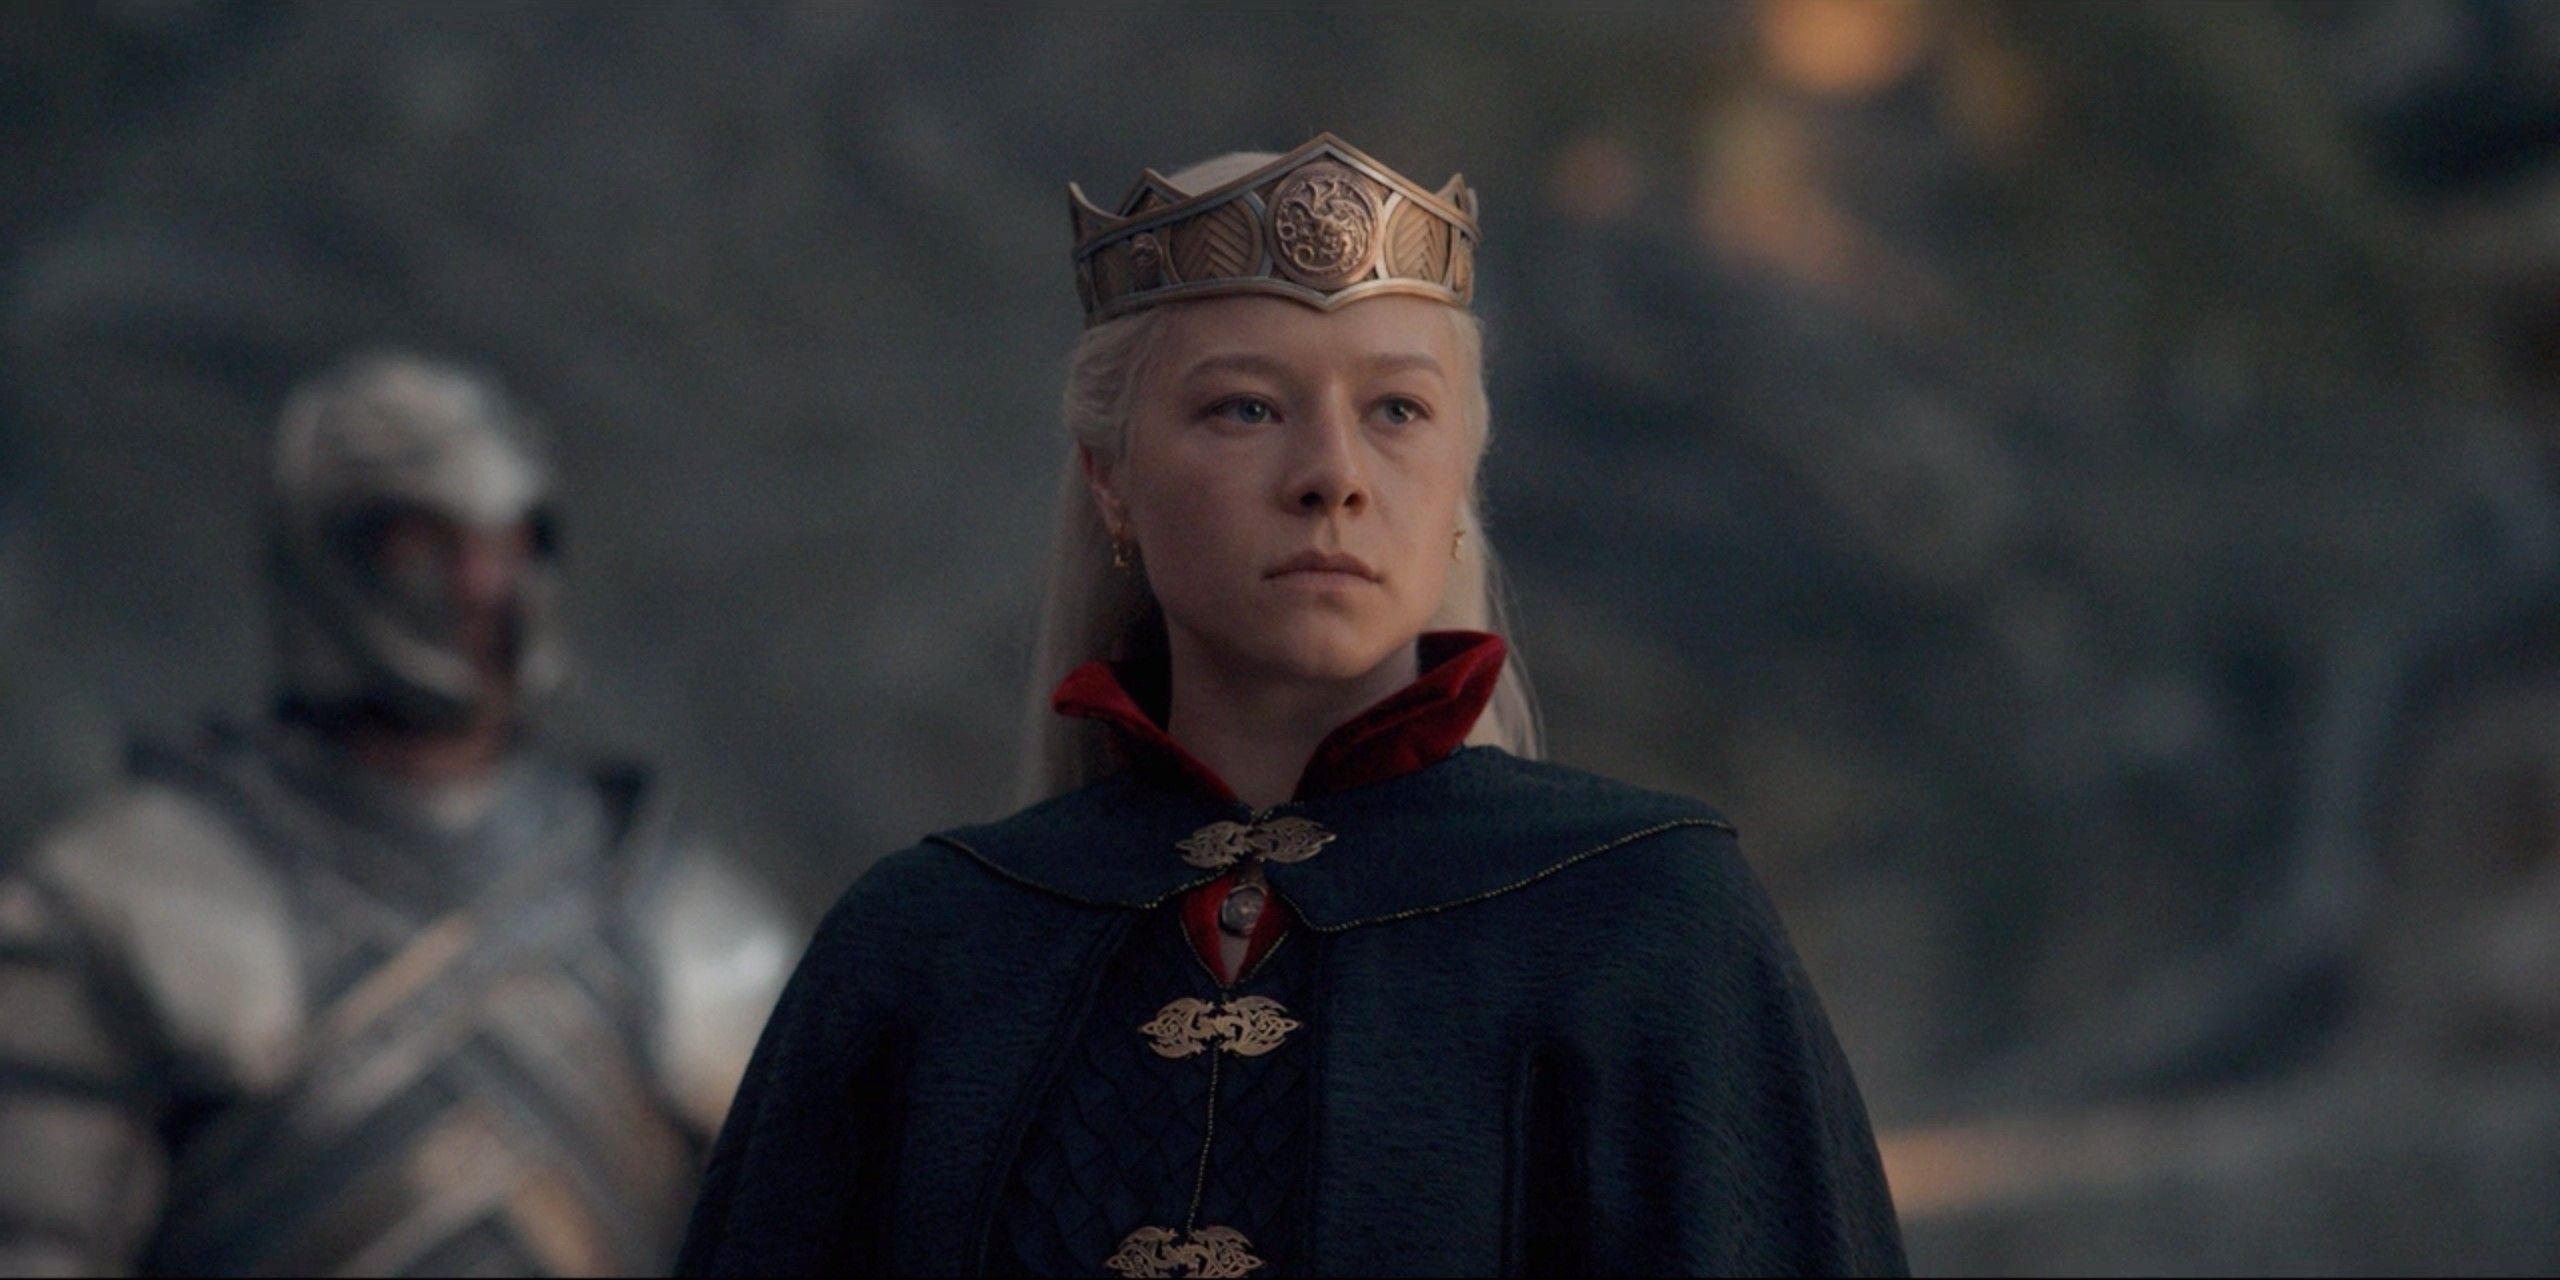 Rhaenyra The Black Queen on House of the Dragon